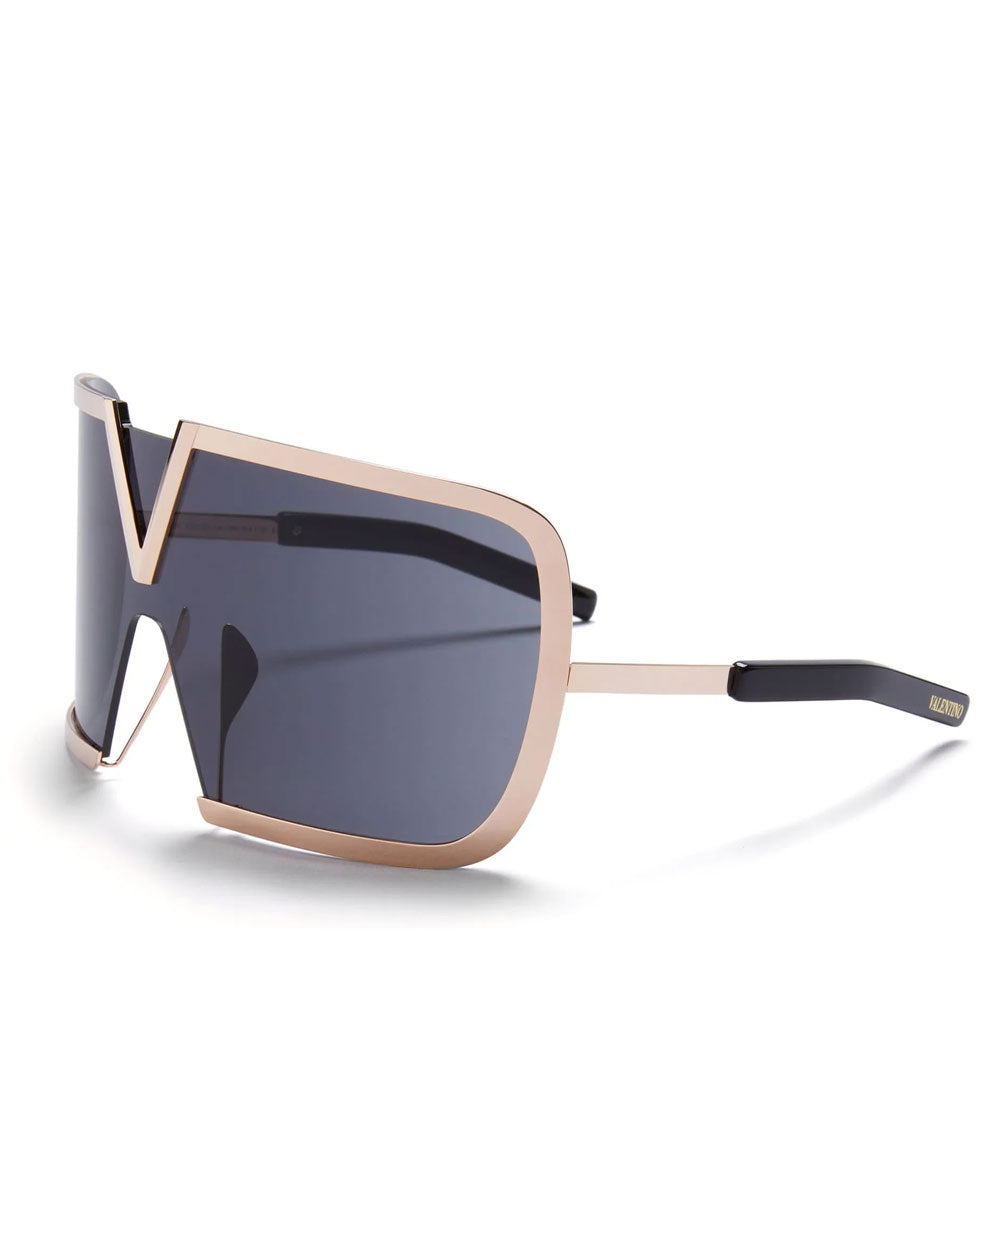 Romask Sunglasses in Black and Rose Gold